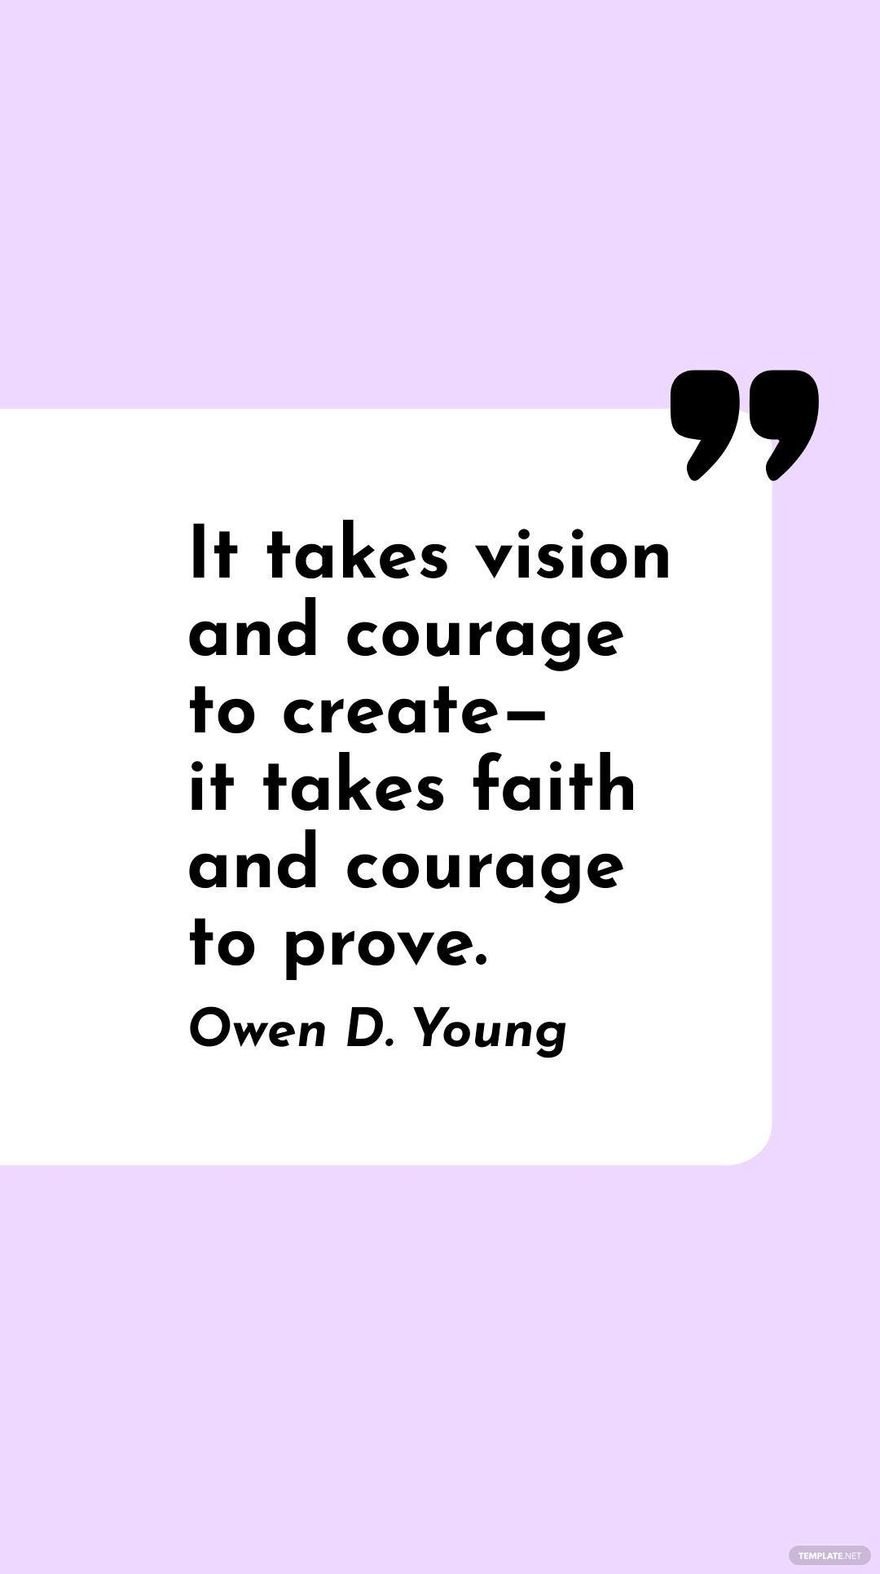 Owen D. Young - It takes vision and courage to create - it takes faith and courage to prove.